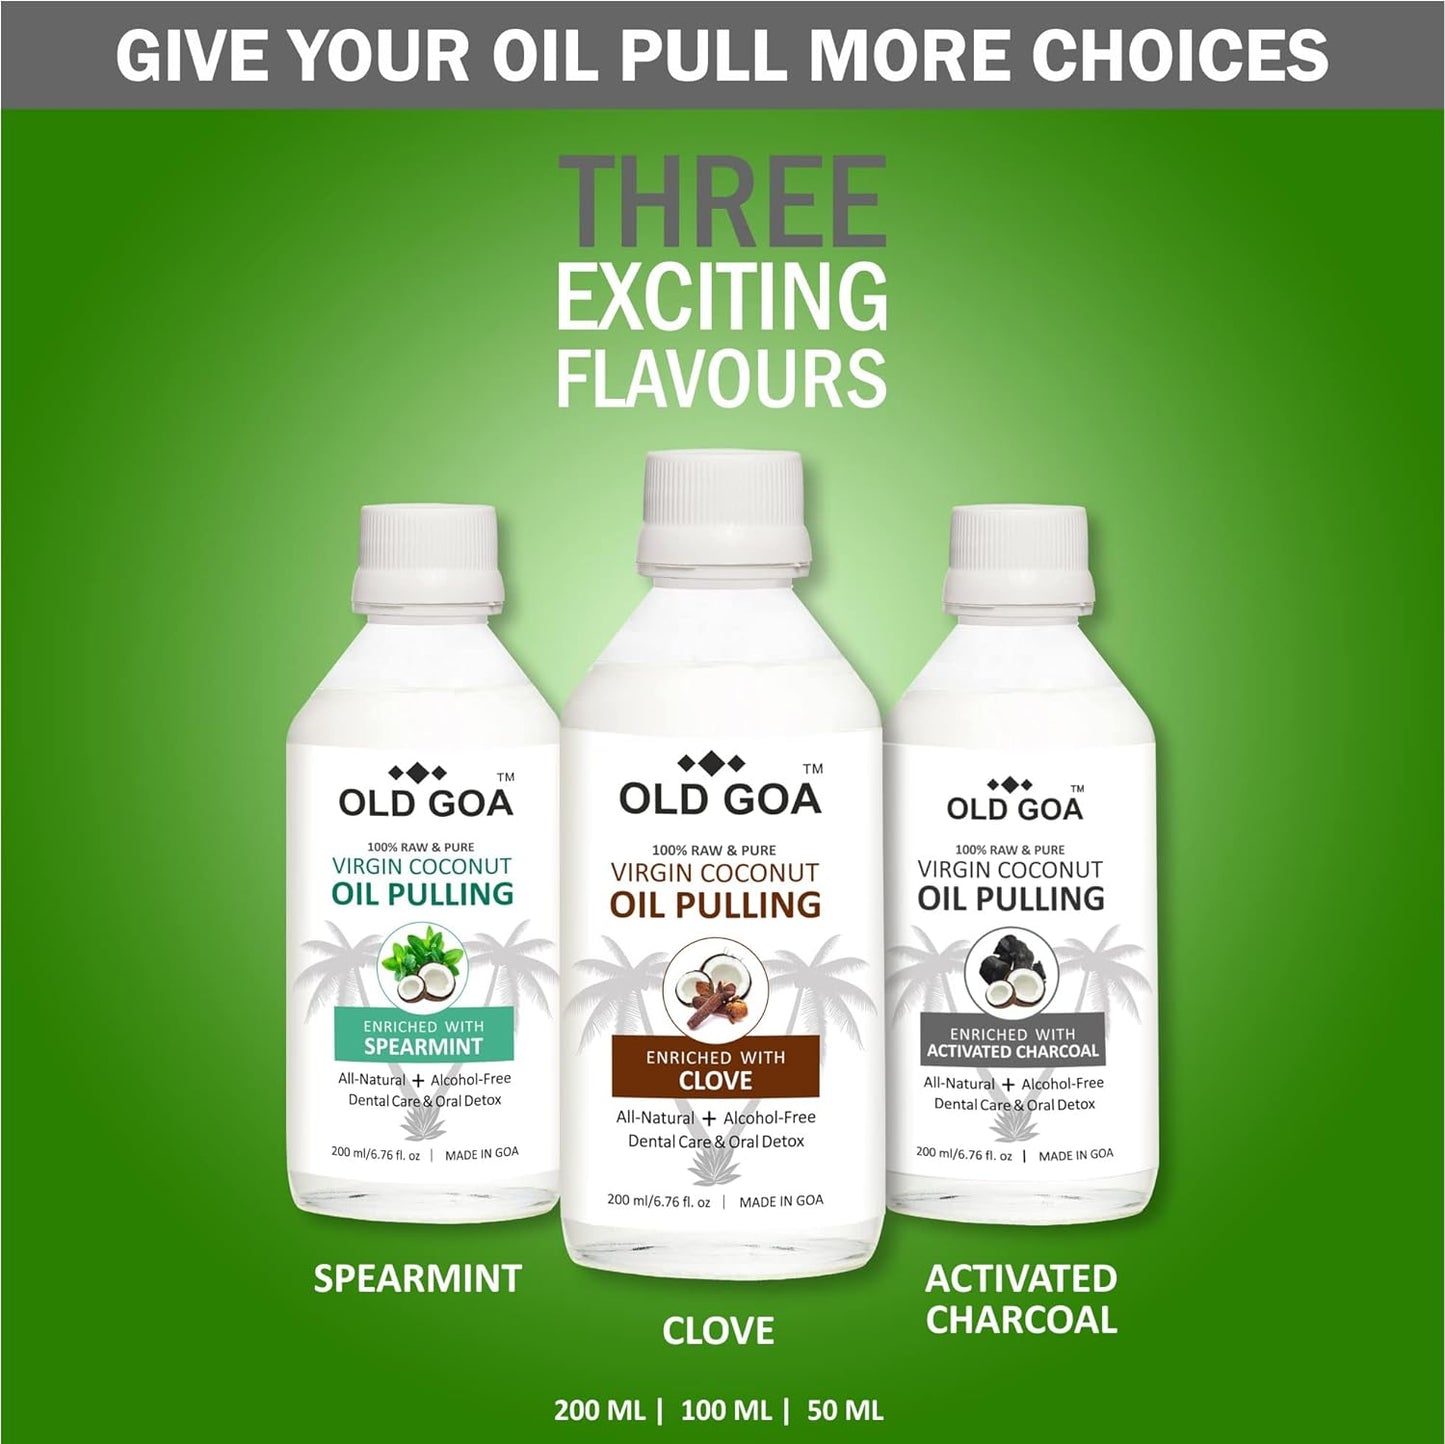 Oil Pulling Combo pack of Activated Charcoal & Cardamom + Turmeric (200ml each)